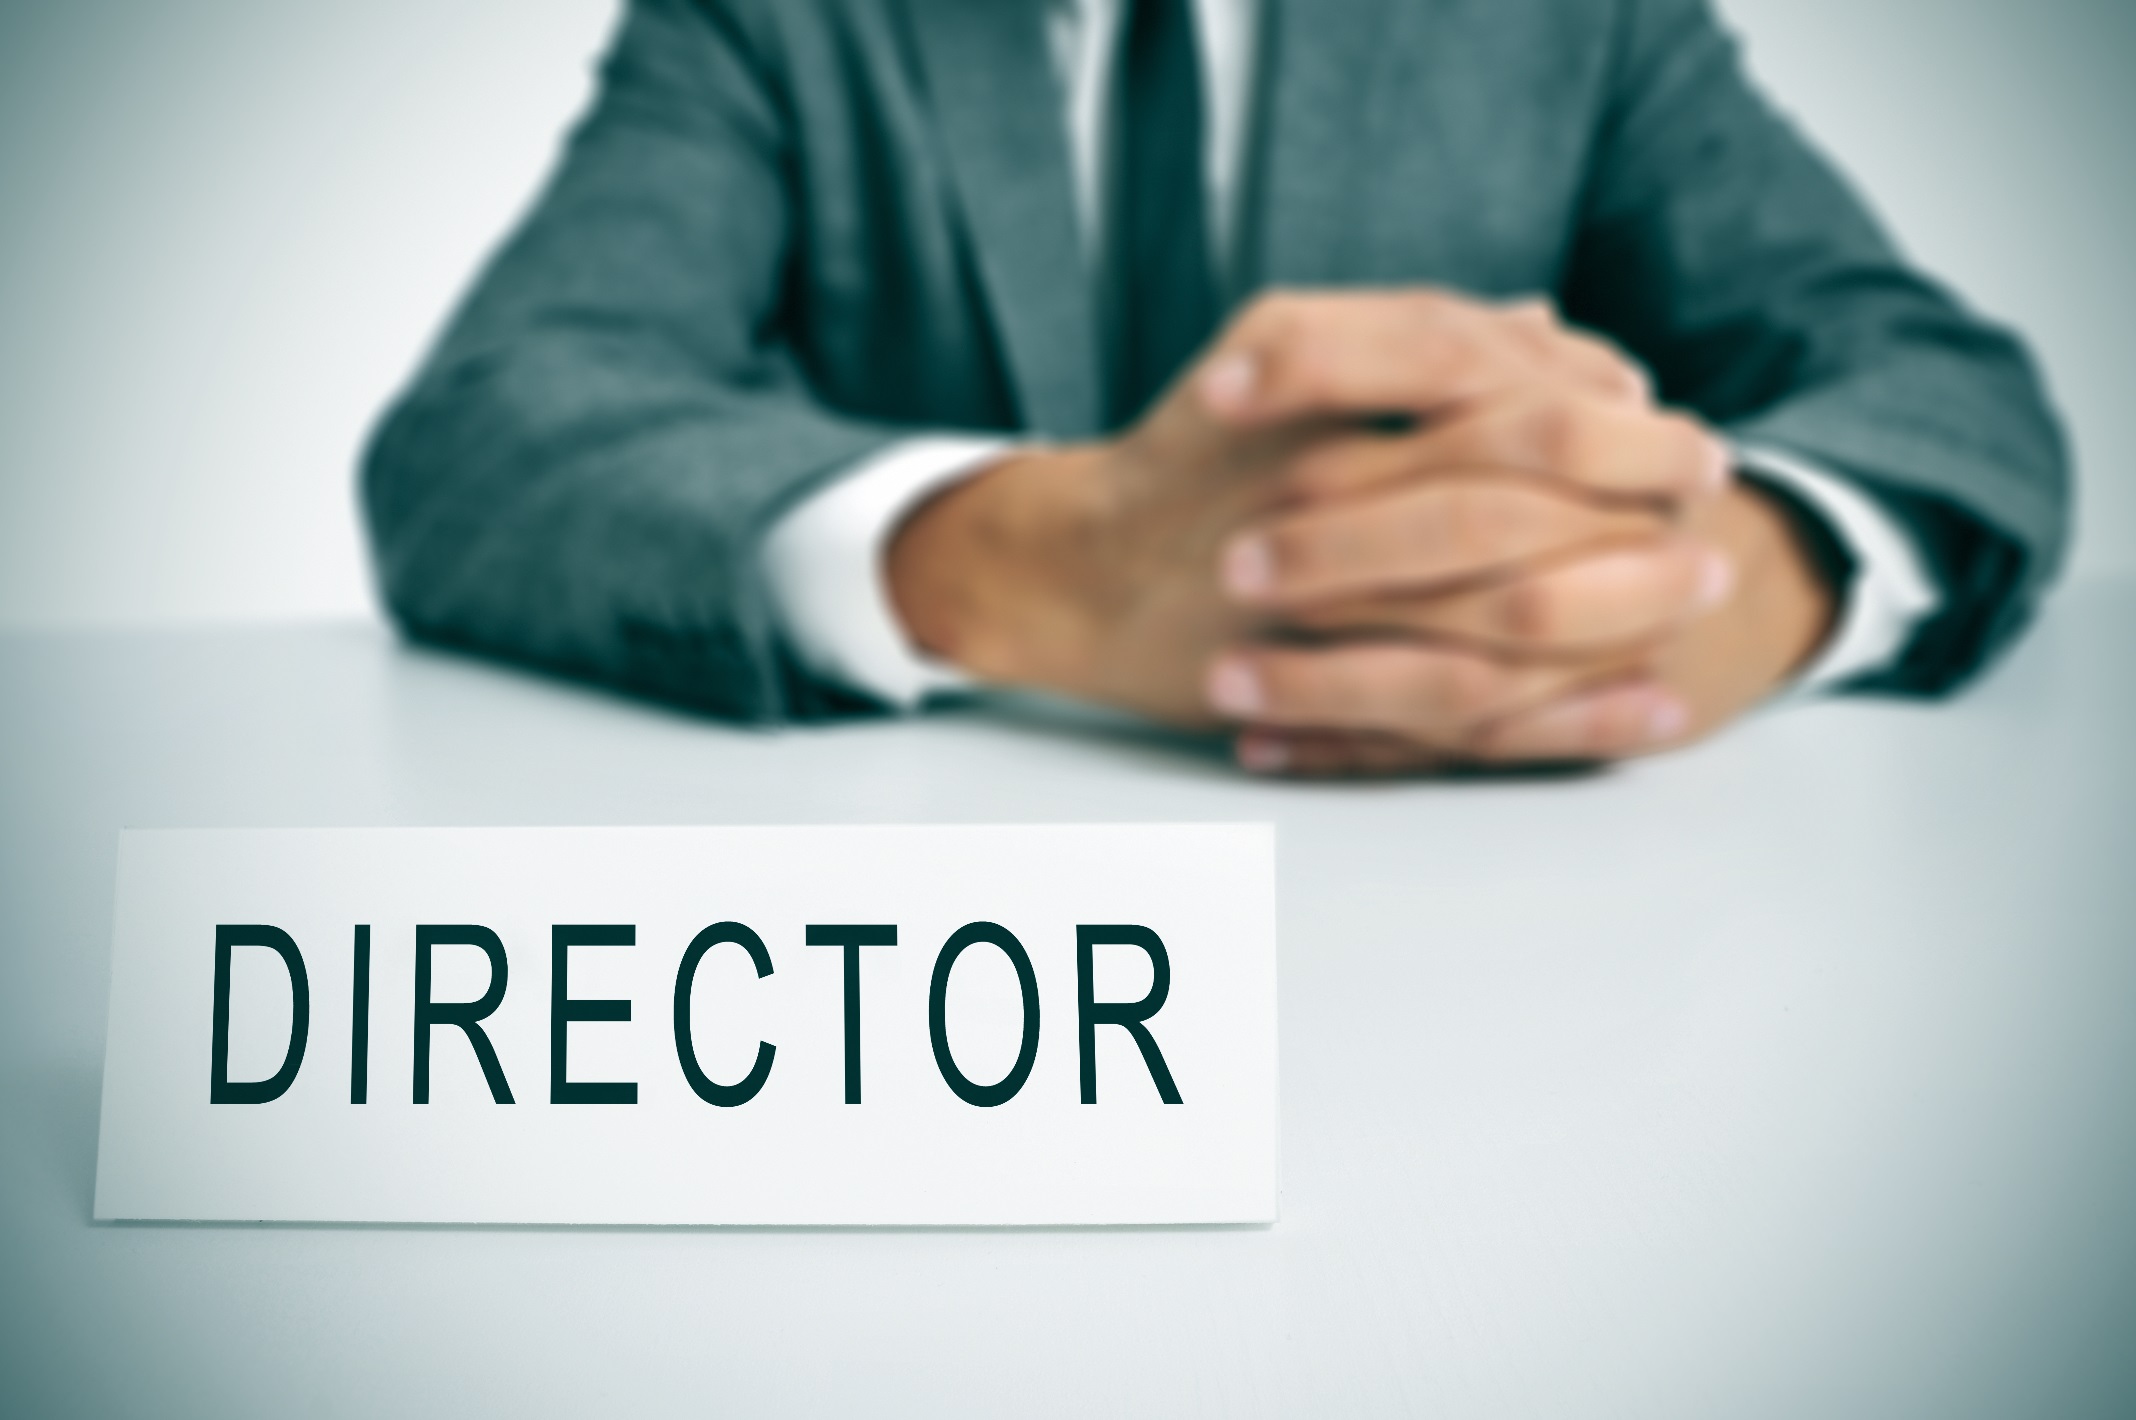 Do You Have Your ASIC Director Identification Number?  A Reminder and a Caution.